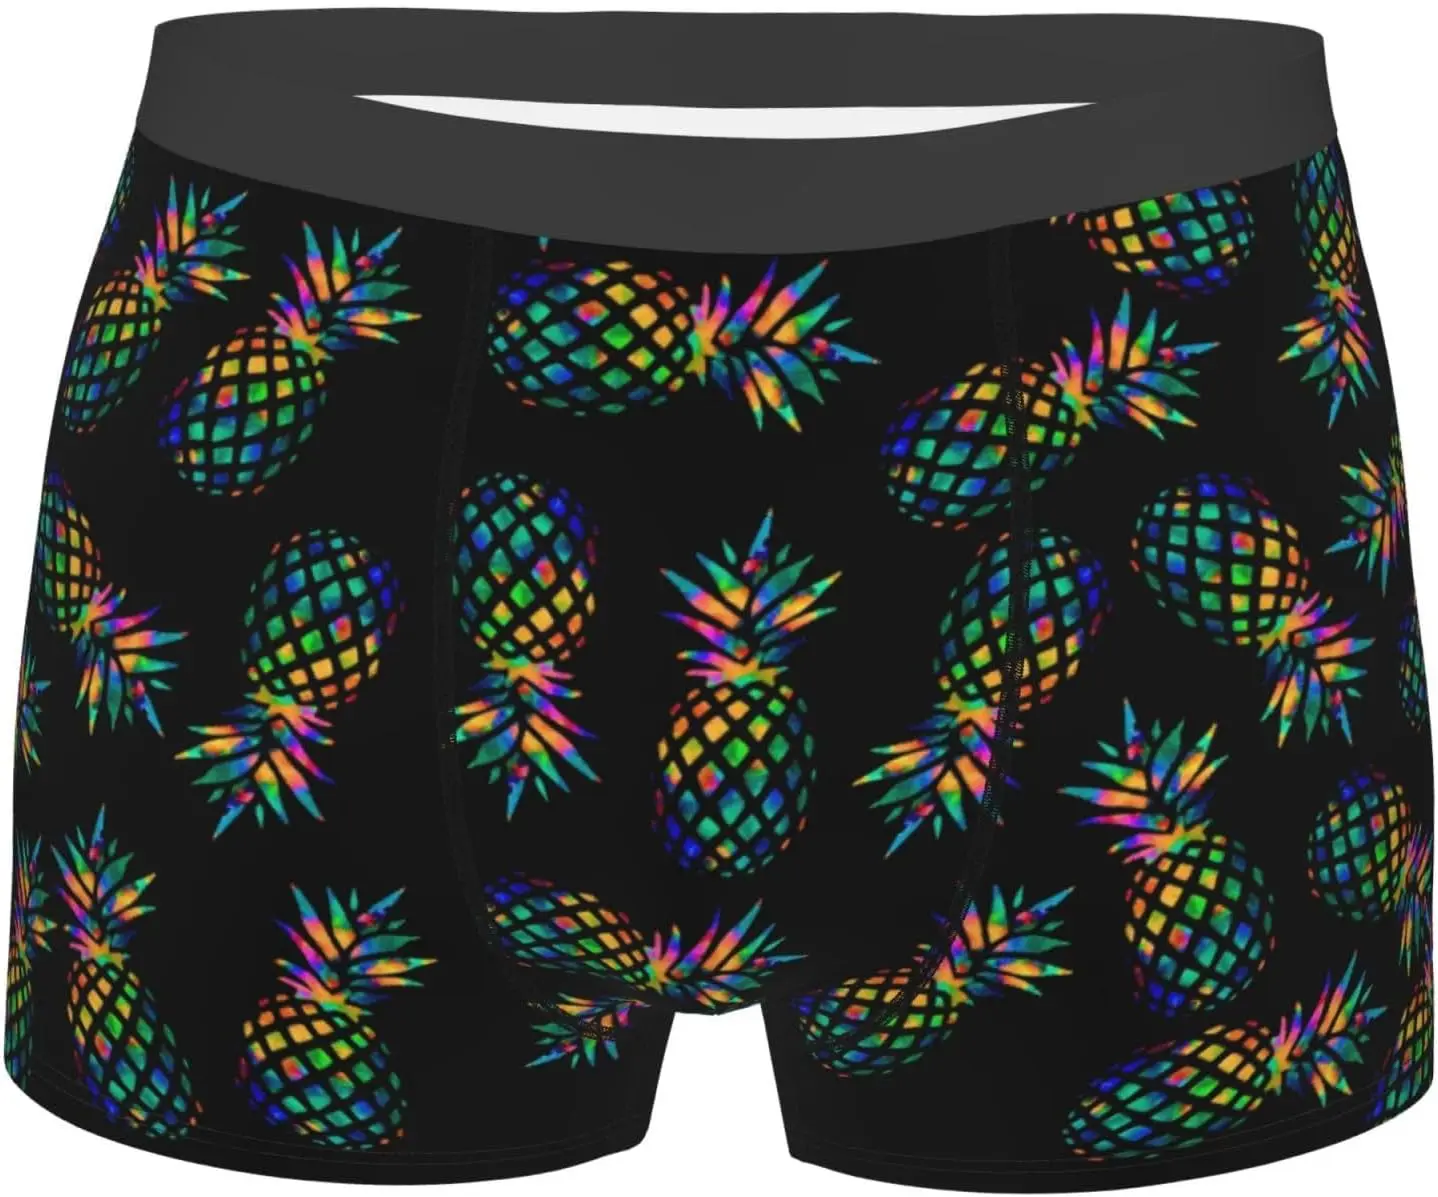 

Men's Briefs Underpants Red Yellow Blue Green Purple Pineapple Print Mens Soft Underwear,Comfy Breathable Short Trunk